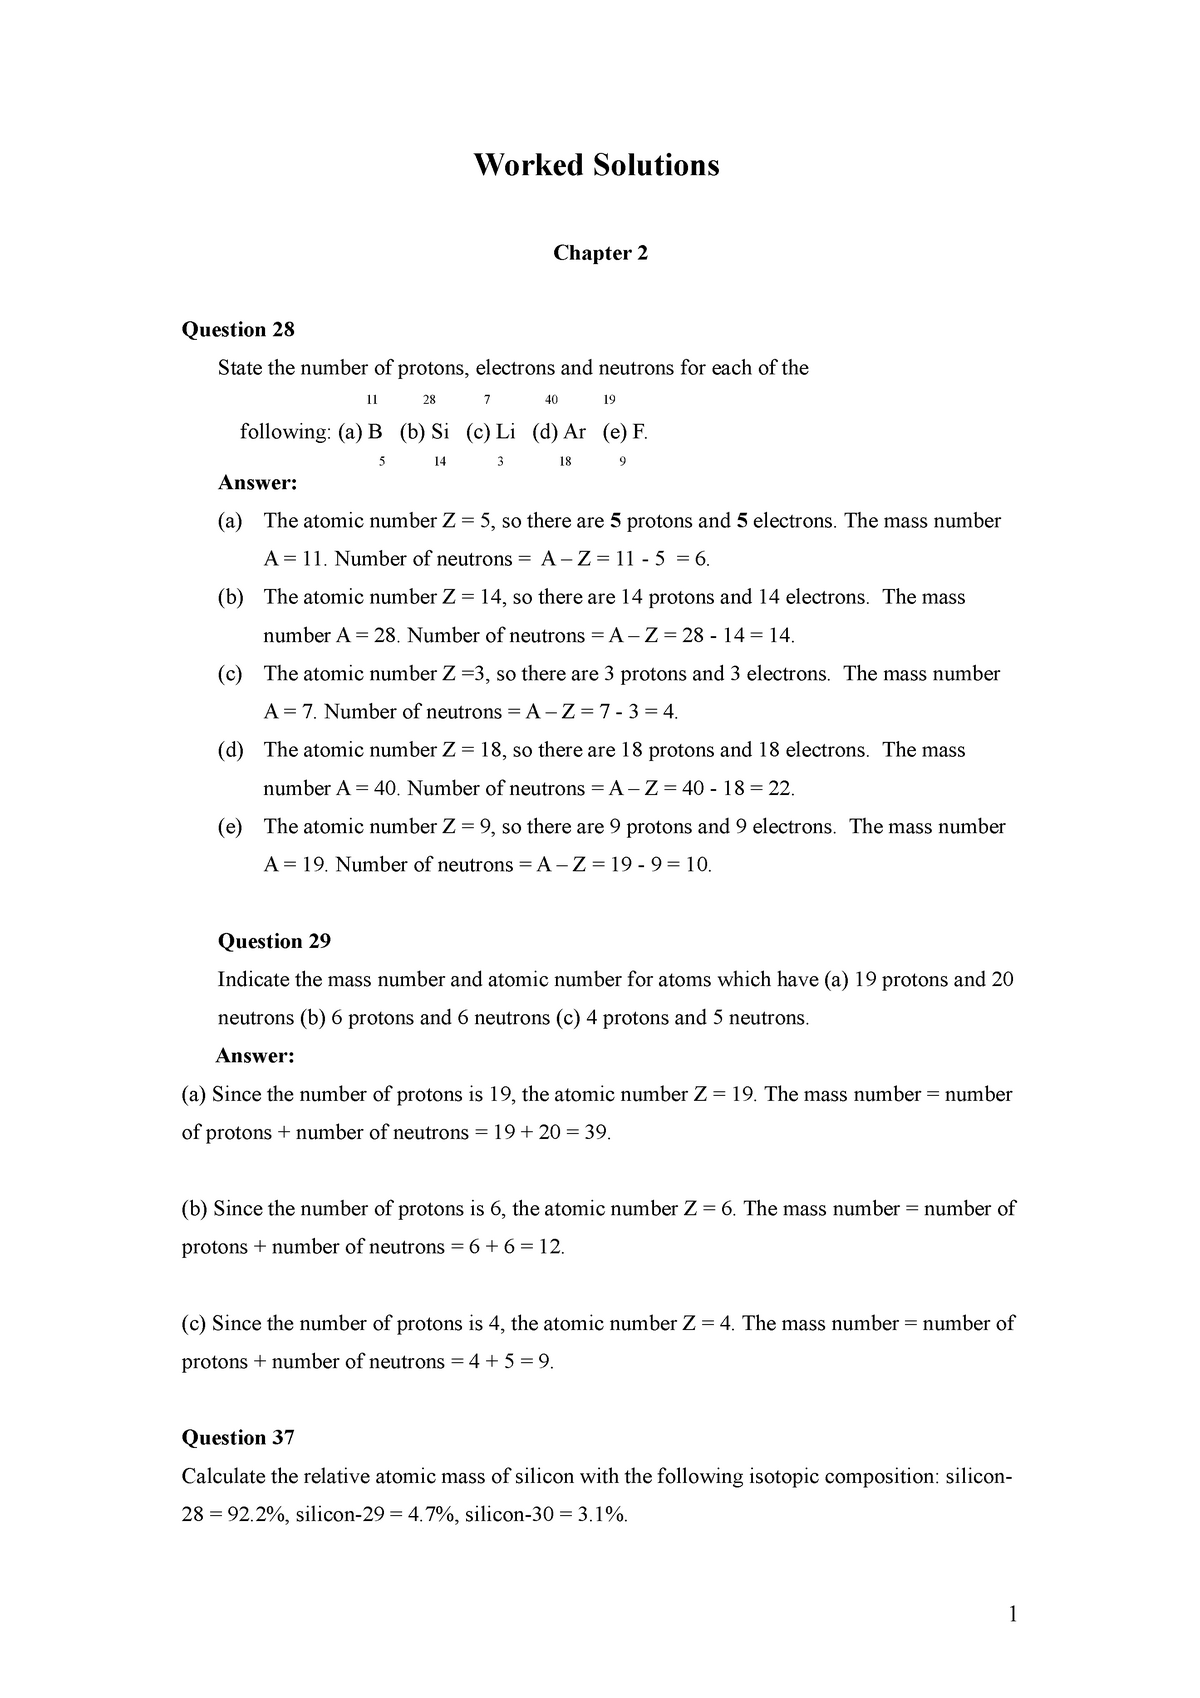 Uc Worked Solutions Ch 02 Worked Solutions Chapter 2 Question 28 State The Number Of Protons Studocu